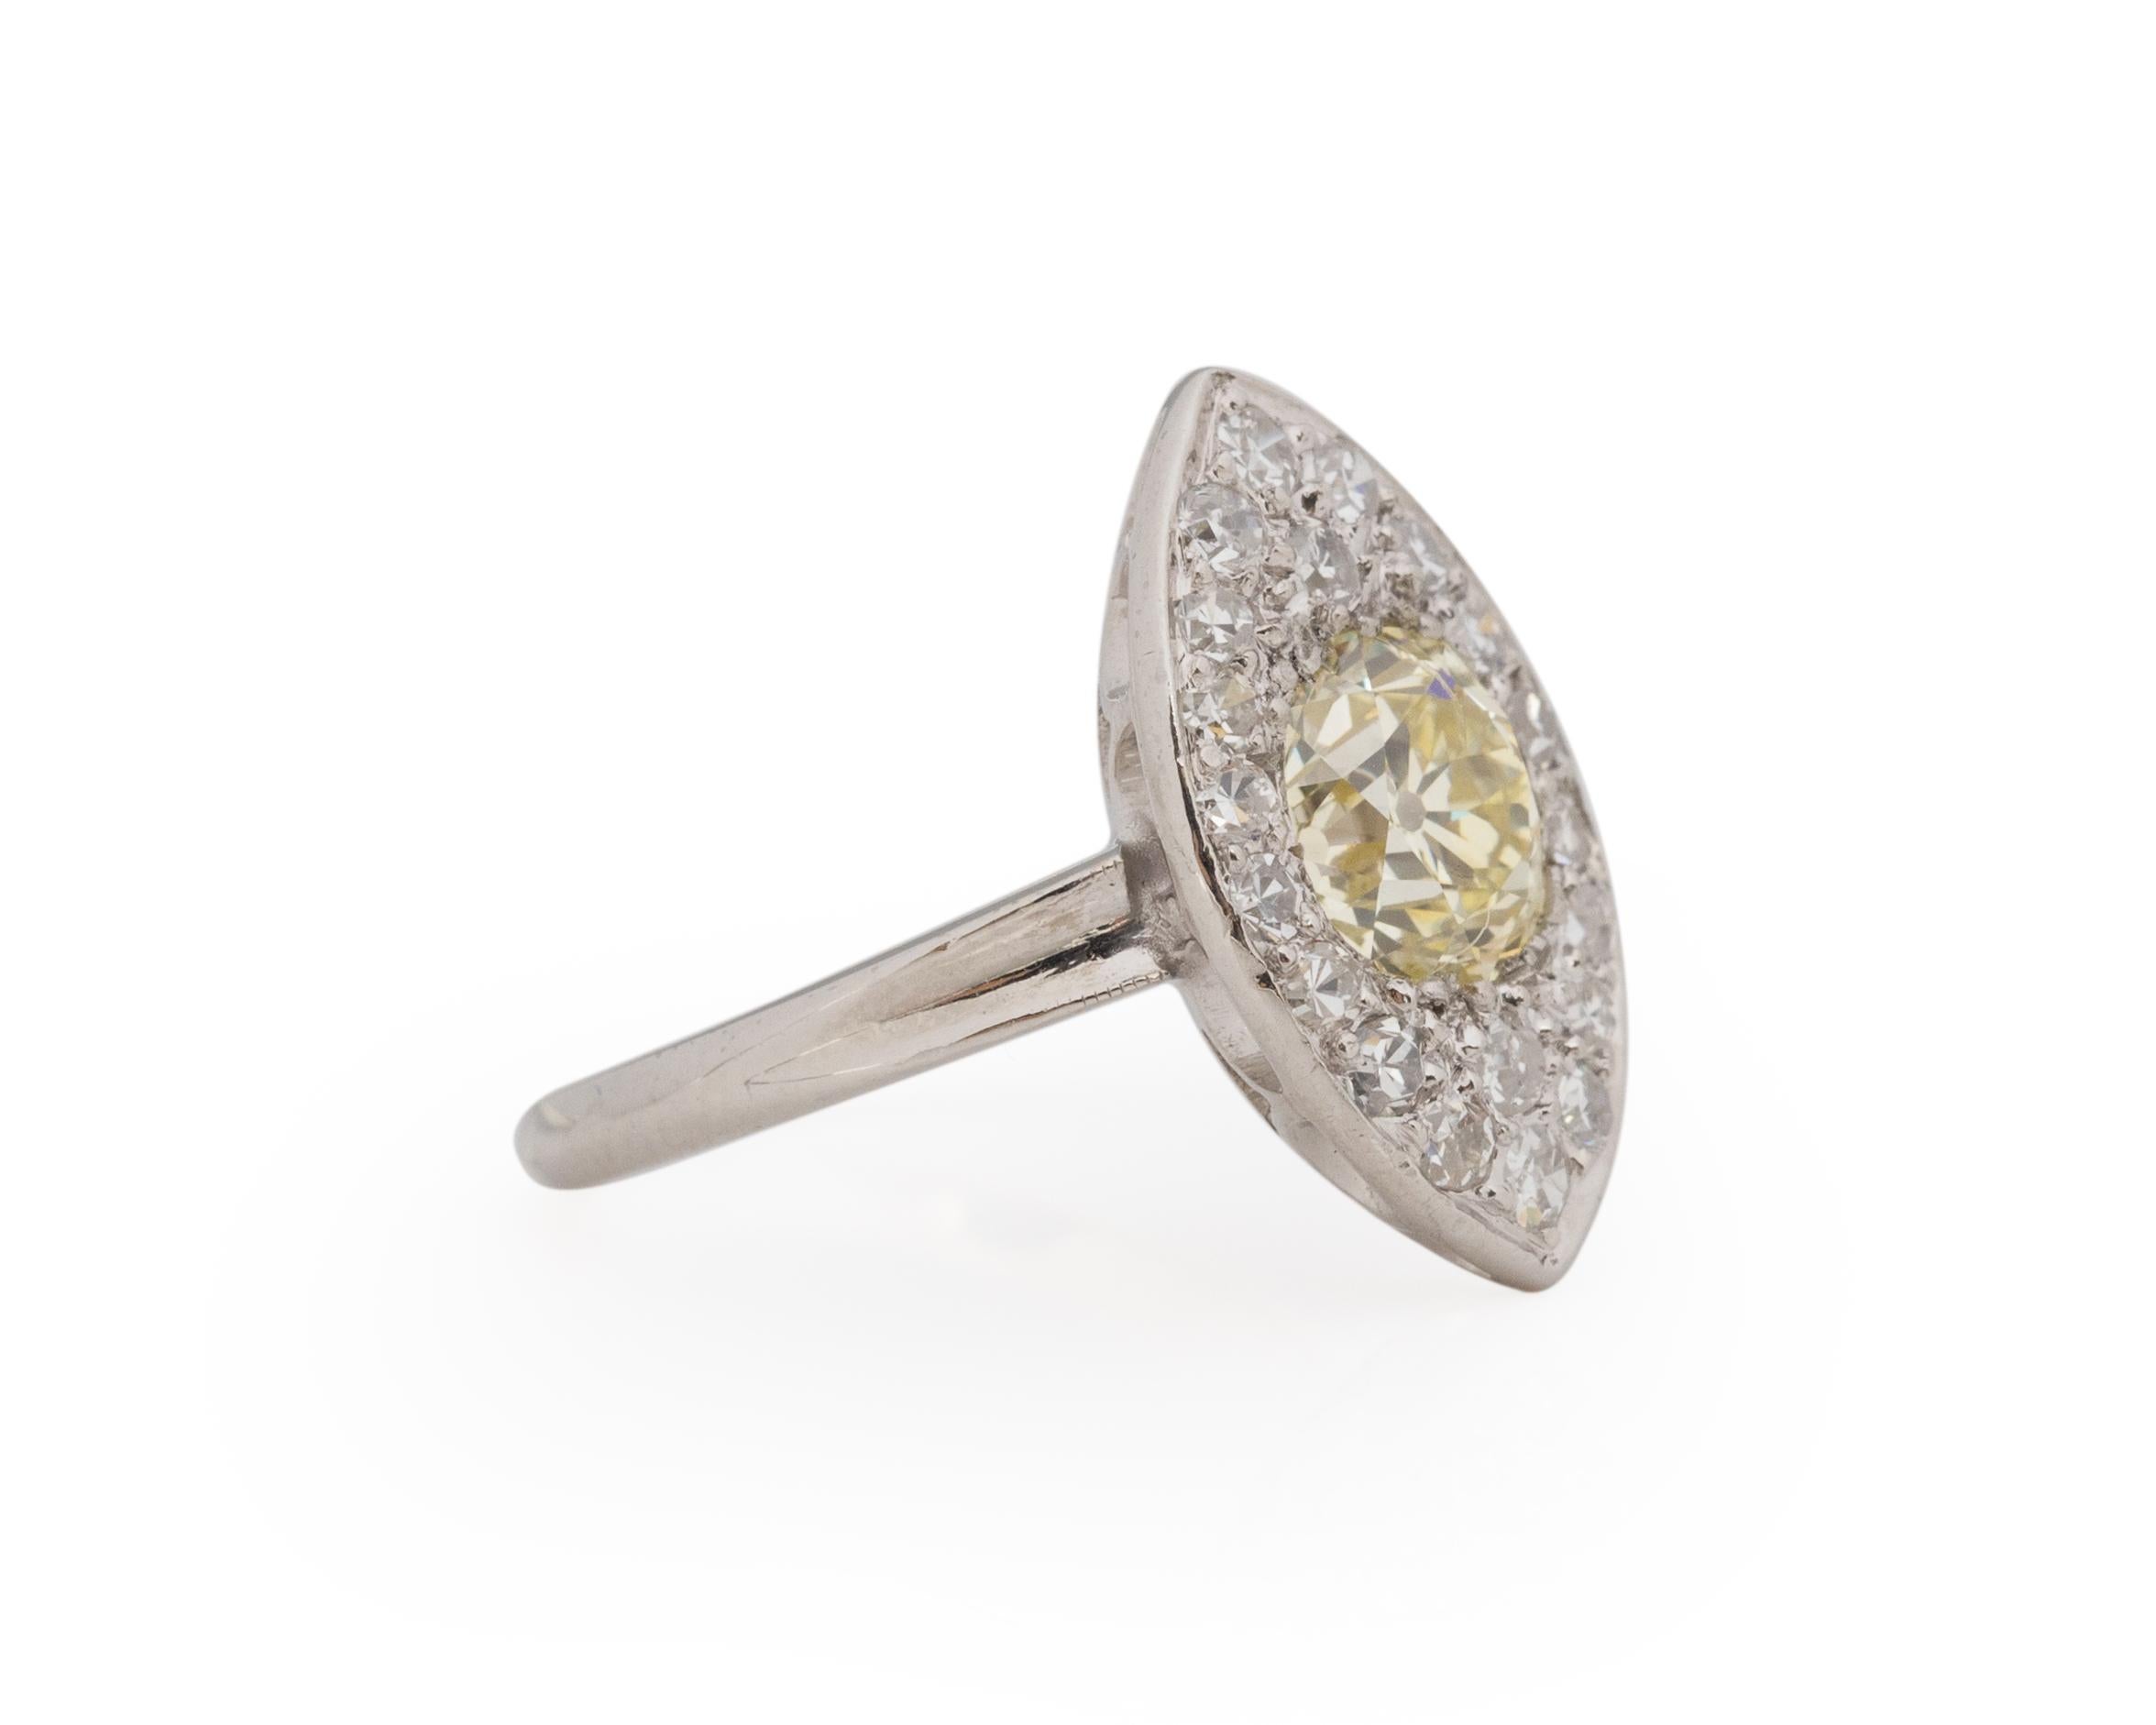 Ring Size: 4
Metal Type: Platinum [Hallmarked, and Tested]
Weight: 4.2 grams

Center Diamond Details:
GIA REPORT #:2221030101
Weight: 1.05ct
Cut: Old European brilliant
Color: Light Yellow (U/V)
Clarity: SI2
Measurements: 6.36mm x 6.24mm x